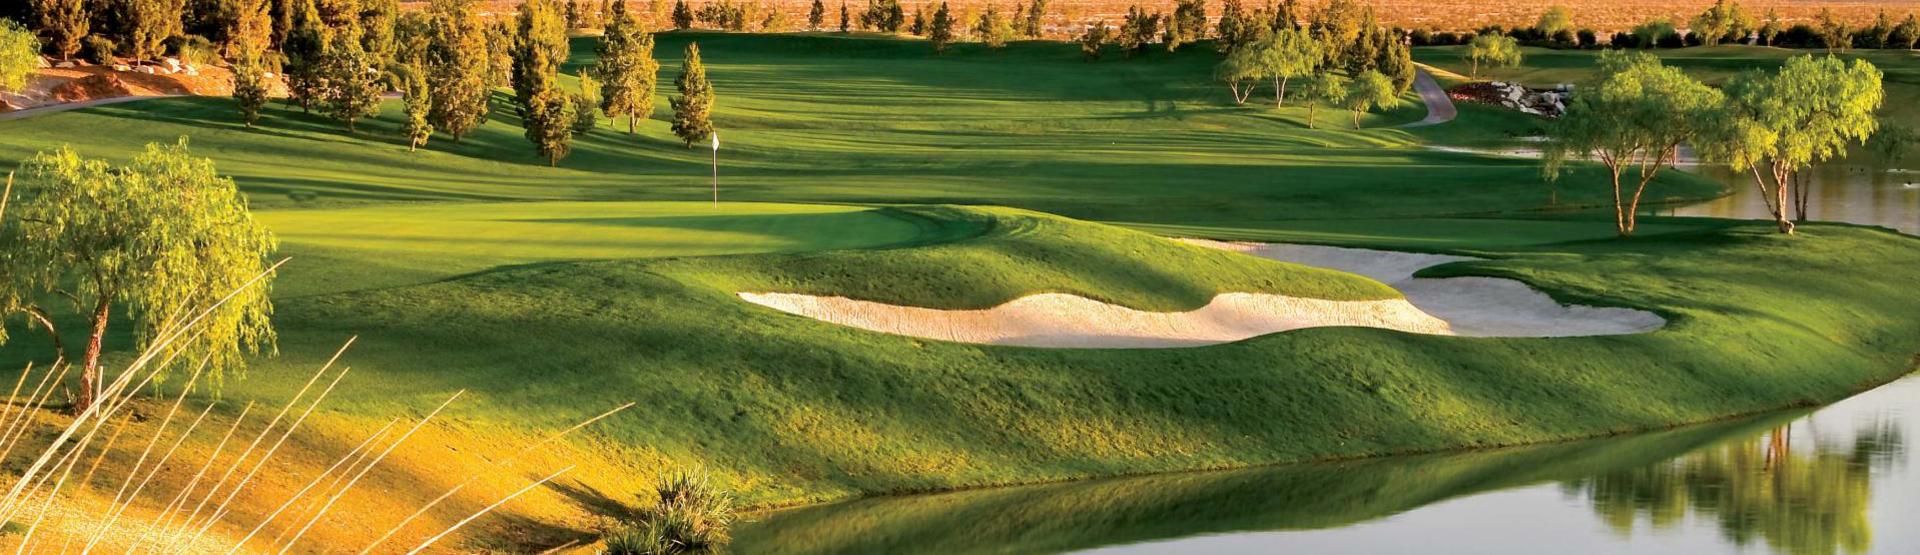 Golf Courses In Greater Palm Springs